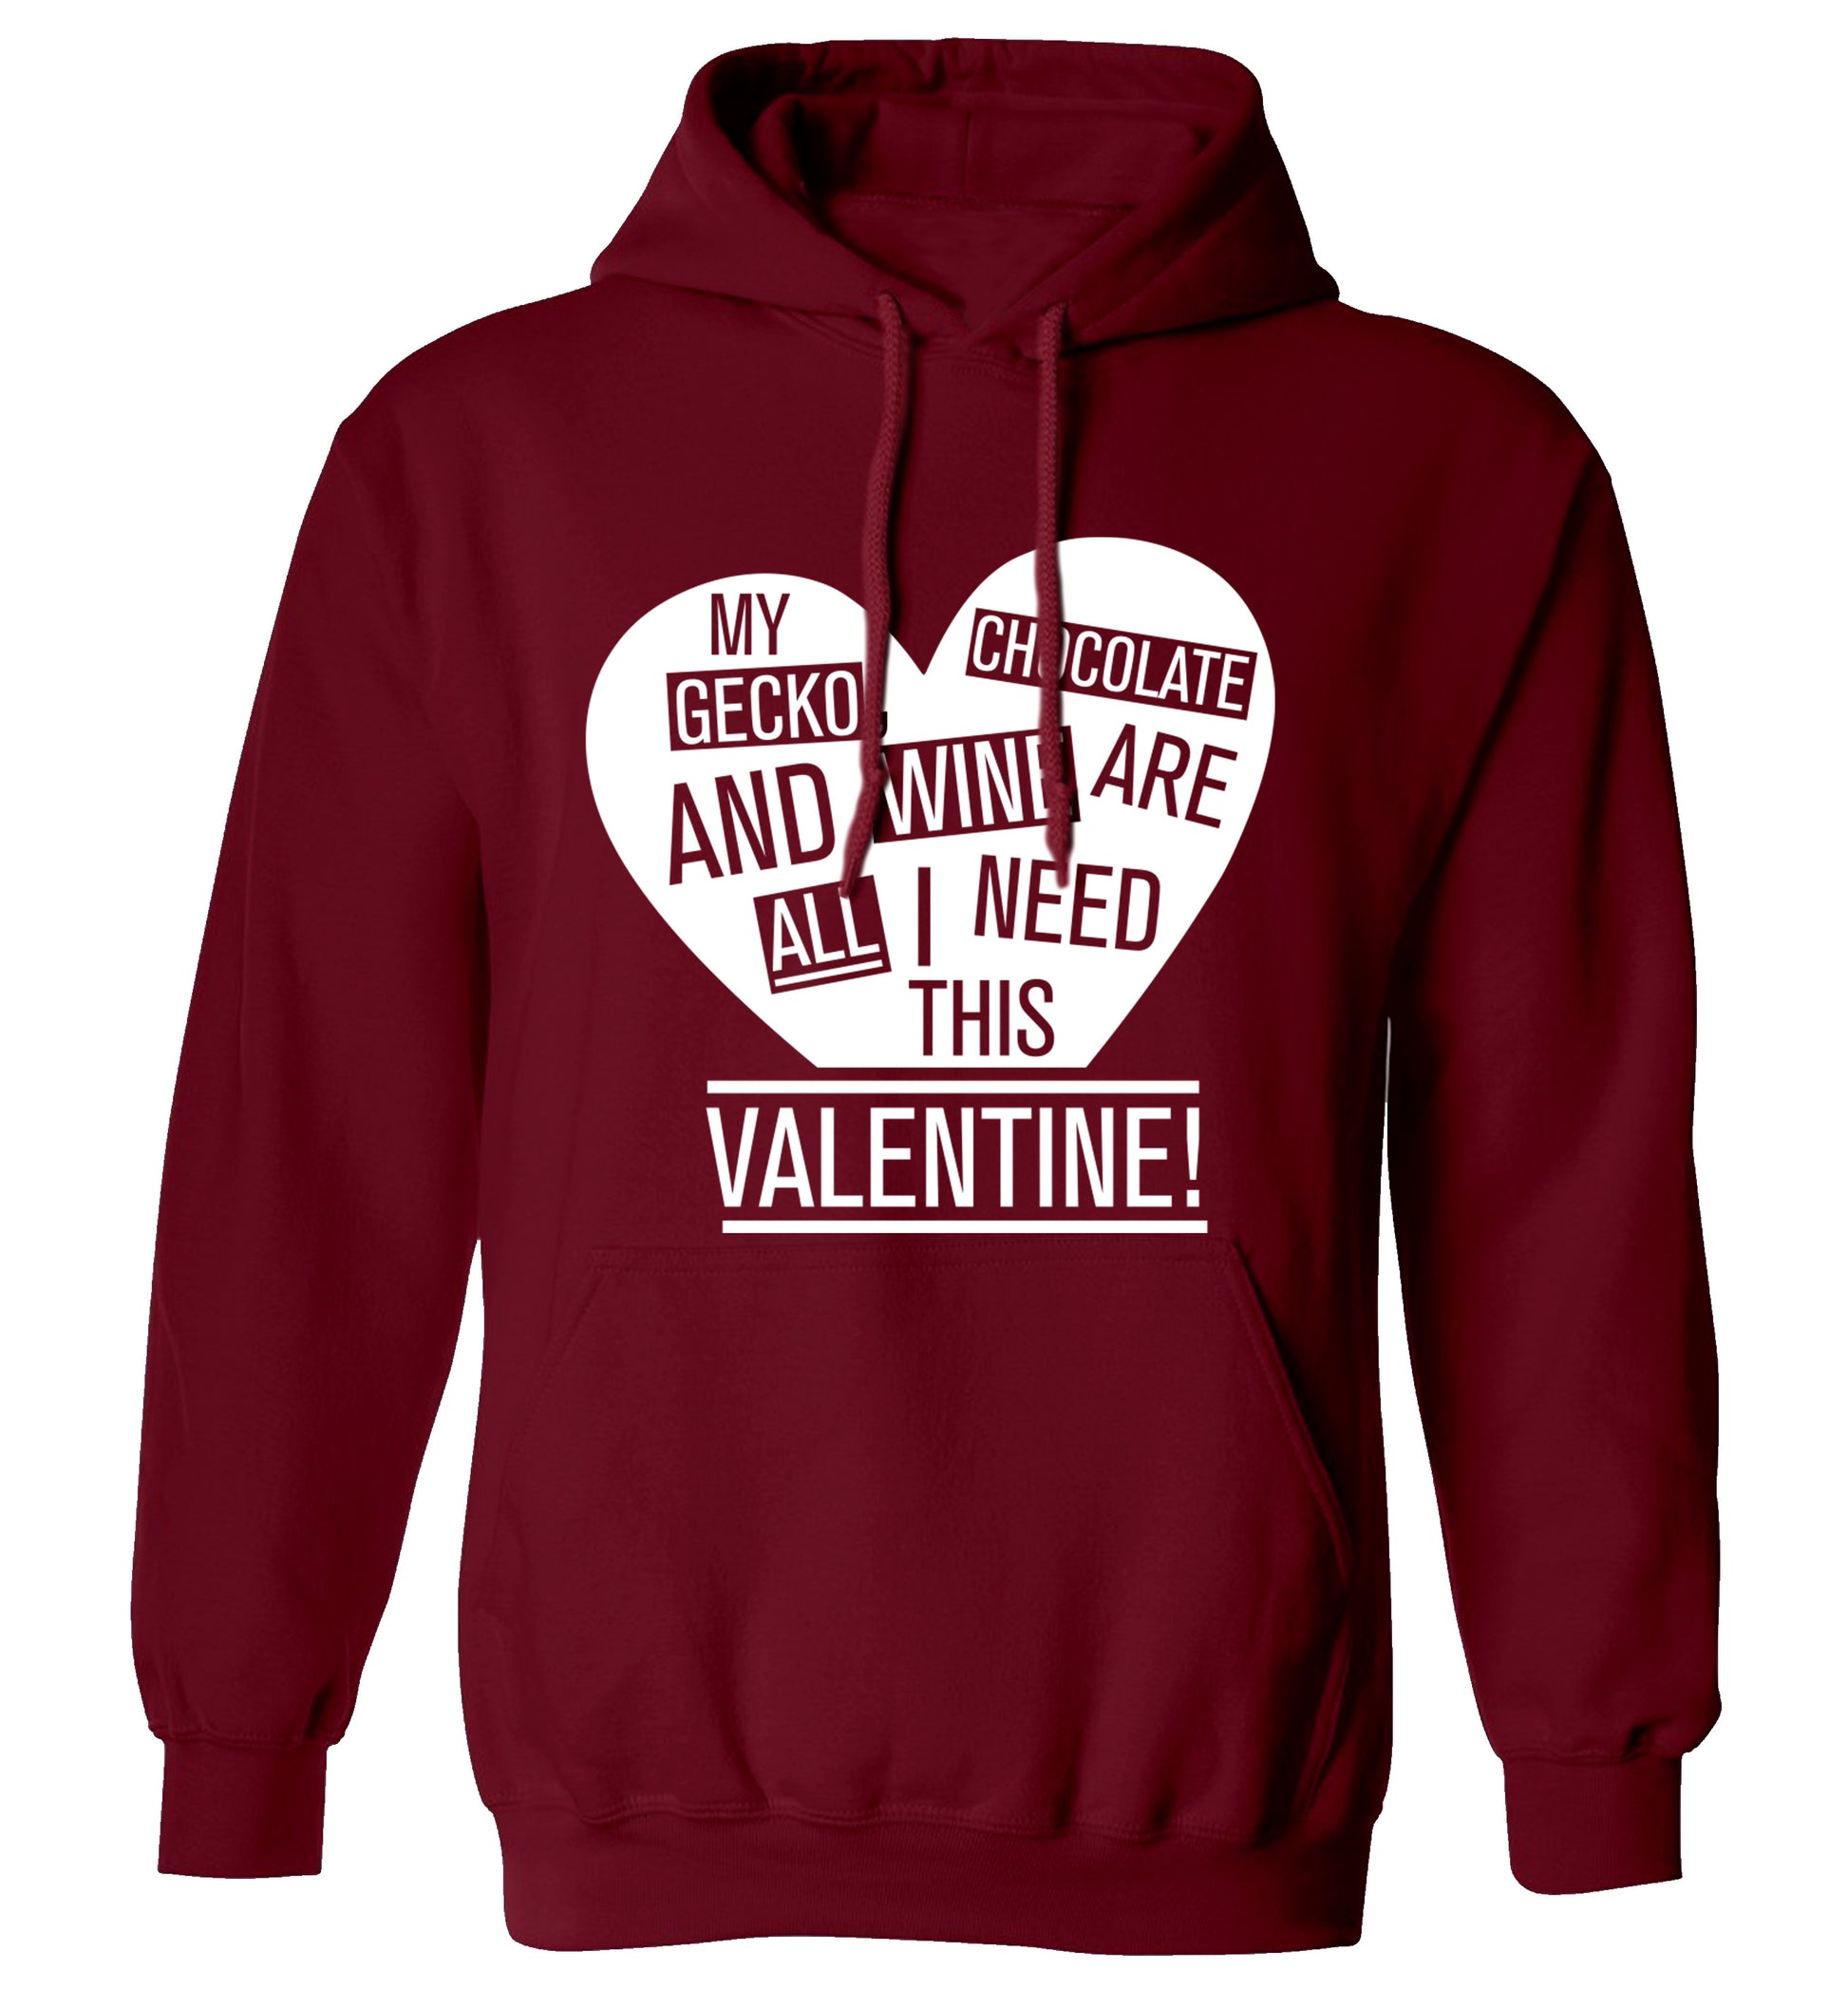 My gecko, chocolate and wine are all I need this valentine! adults unisex maroon hoodie 2XL